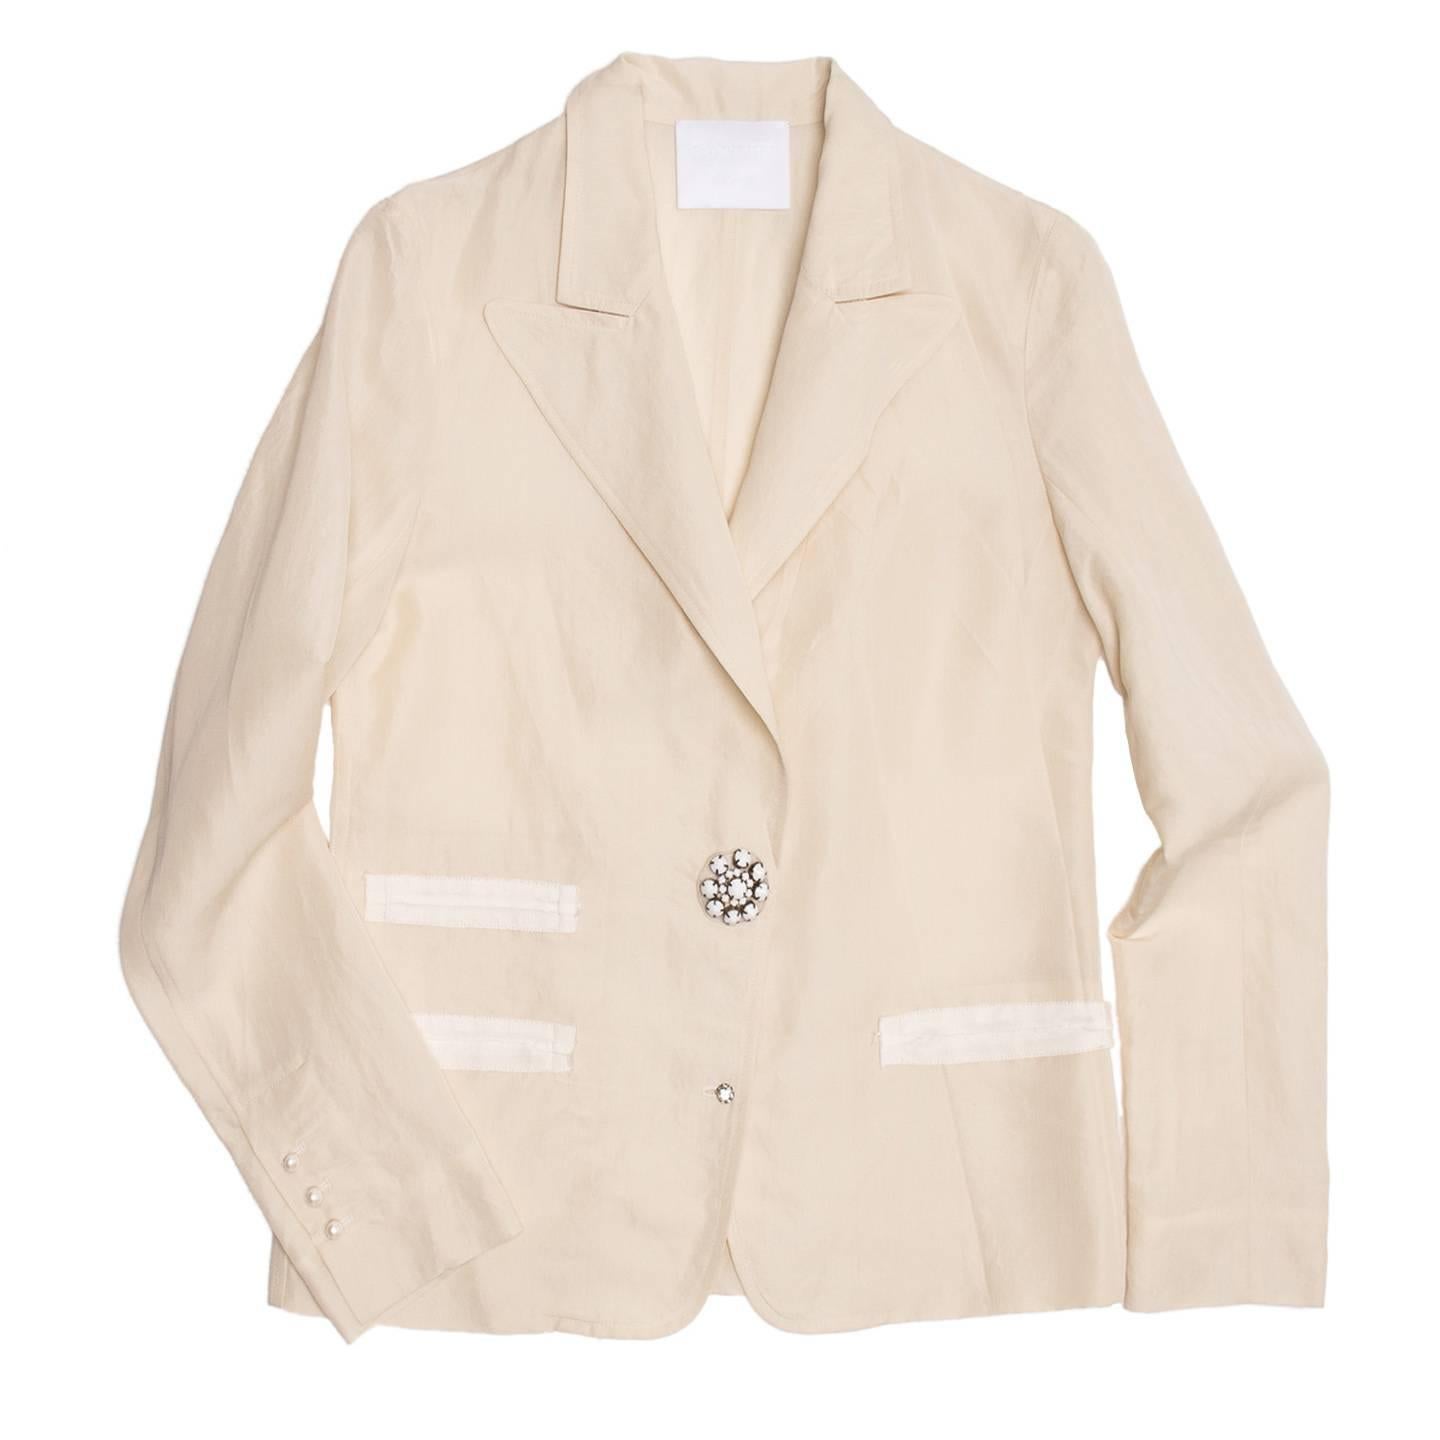 Lanvin 2008. Cream colored raw silk blazer with three slit pockets defined by ivory grosgrain ribbons. Small round perl buttons adorn the cuffs and a big white stone jewel button together with a little silver rhinestone flower button fasten and